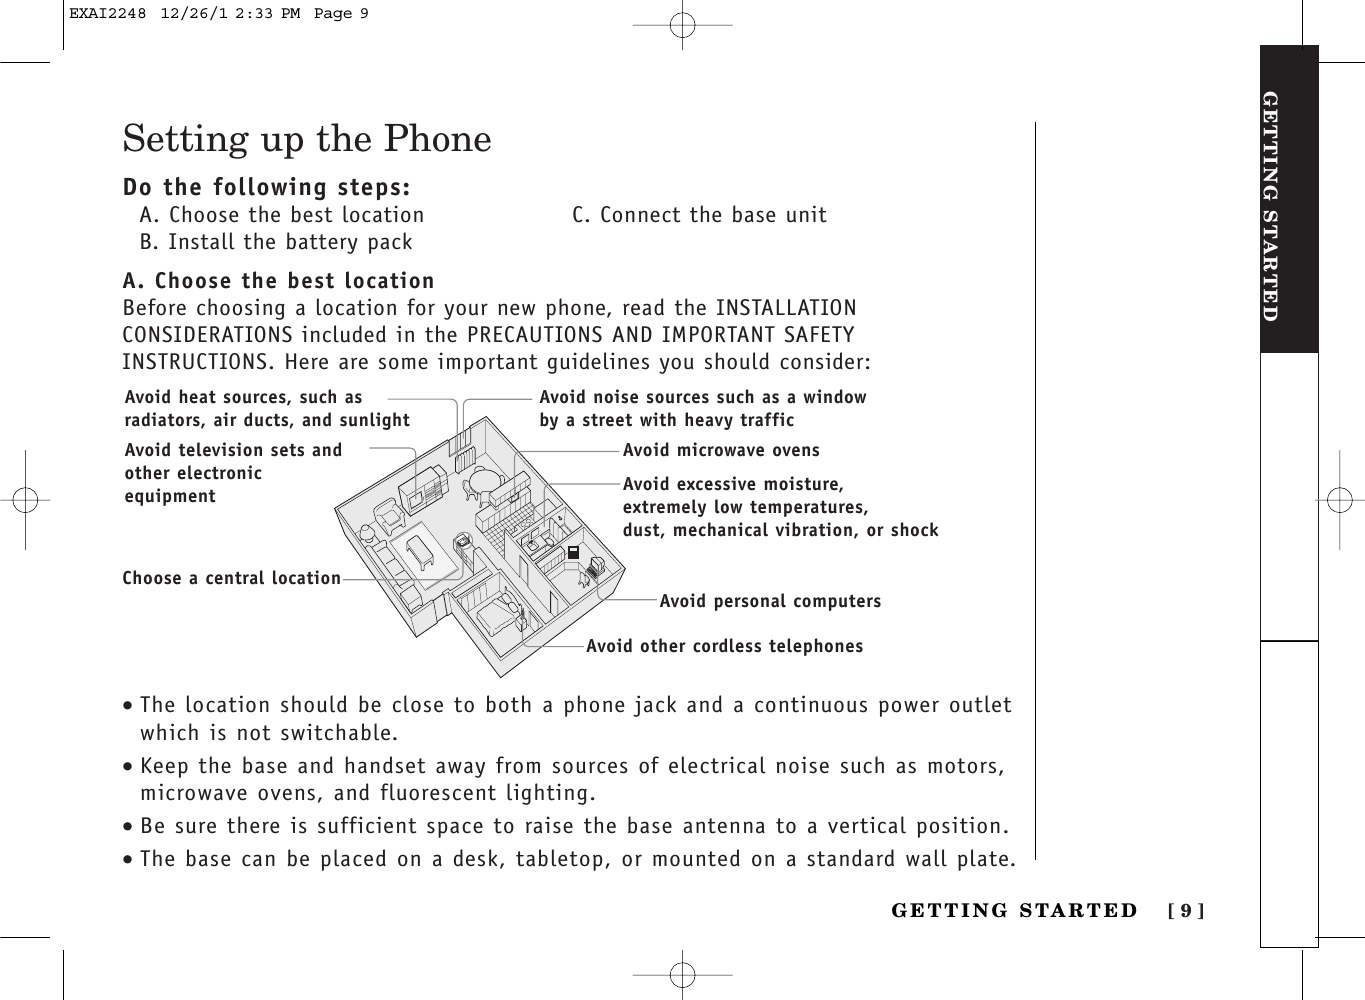 [ 9 ]GETTING STARTEDGETTING STARTEDSetting up the PhoneDo the following steps:A. Choose the best location C. Connect the base unitB. Install the battery packA. Choose the best locationBefore choosing a location for your new phone, read the INSTALLATIONCONSIDERATIONS included in the PRECAUTIONS AND IMPORTANT SAFETYINSTRUCTIONS. Here are some important guidelines you should consider:•The location should be close to both a phone jack and a continuous power outletwhich is not switchable.•Keep the base and handset away from sources of electrical noise such as motors,microwave ovens, and fluorescent lighting.•Be sure there is sufficient space to raise the base antenna to a vertical position.•The base can be placed on a desk, tabletop, or mounted on a standard wall plate.Avoid excessive moisture, extremely low temperatures, dust, mechanical vibration, or shockAvoid heat sources, such asradiators, air ducts, and sunlightAvoid television sets andother electronicequipmentAvoid noise sources such as a windowby a street with heavy trafficAvoid microwave ovensAvoid personal computersAvoid other cordless telephonesChoose a central locationEXAI2248  12/26/1 2:33 PM  Page 9